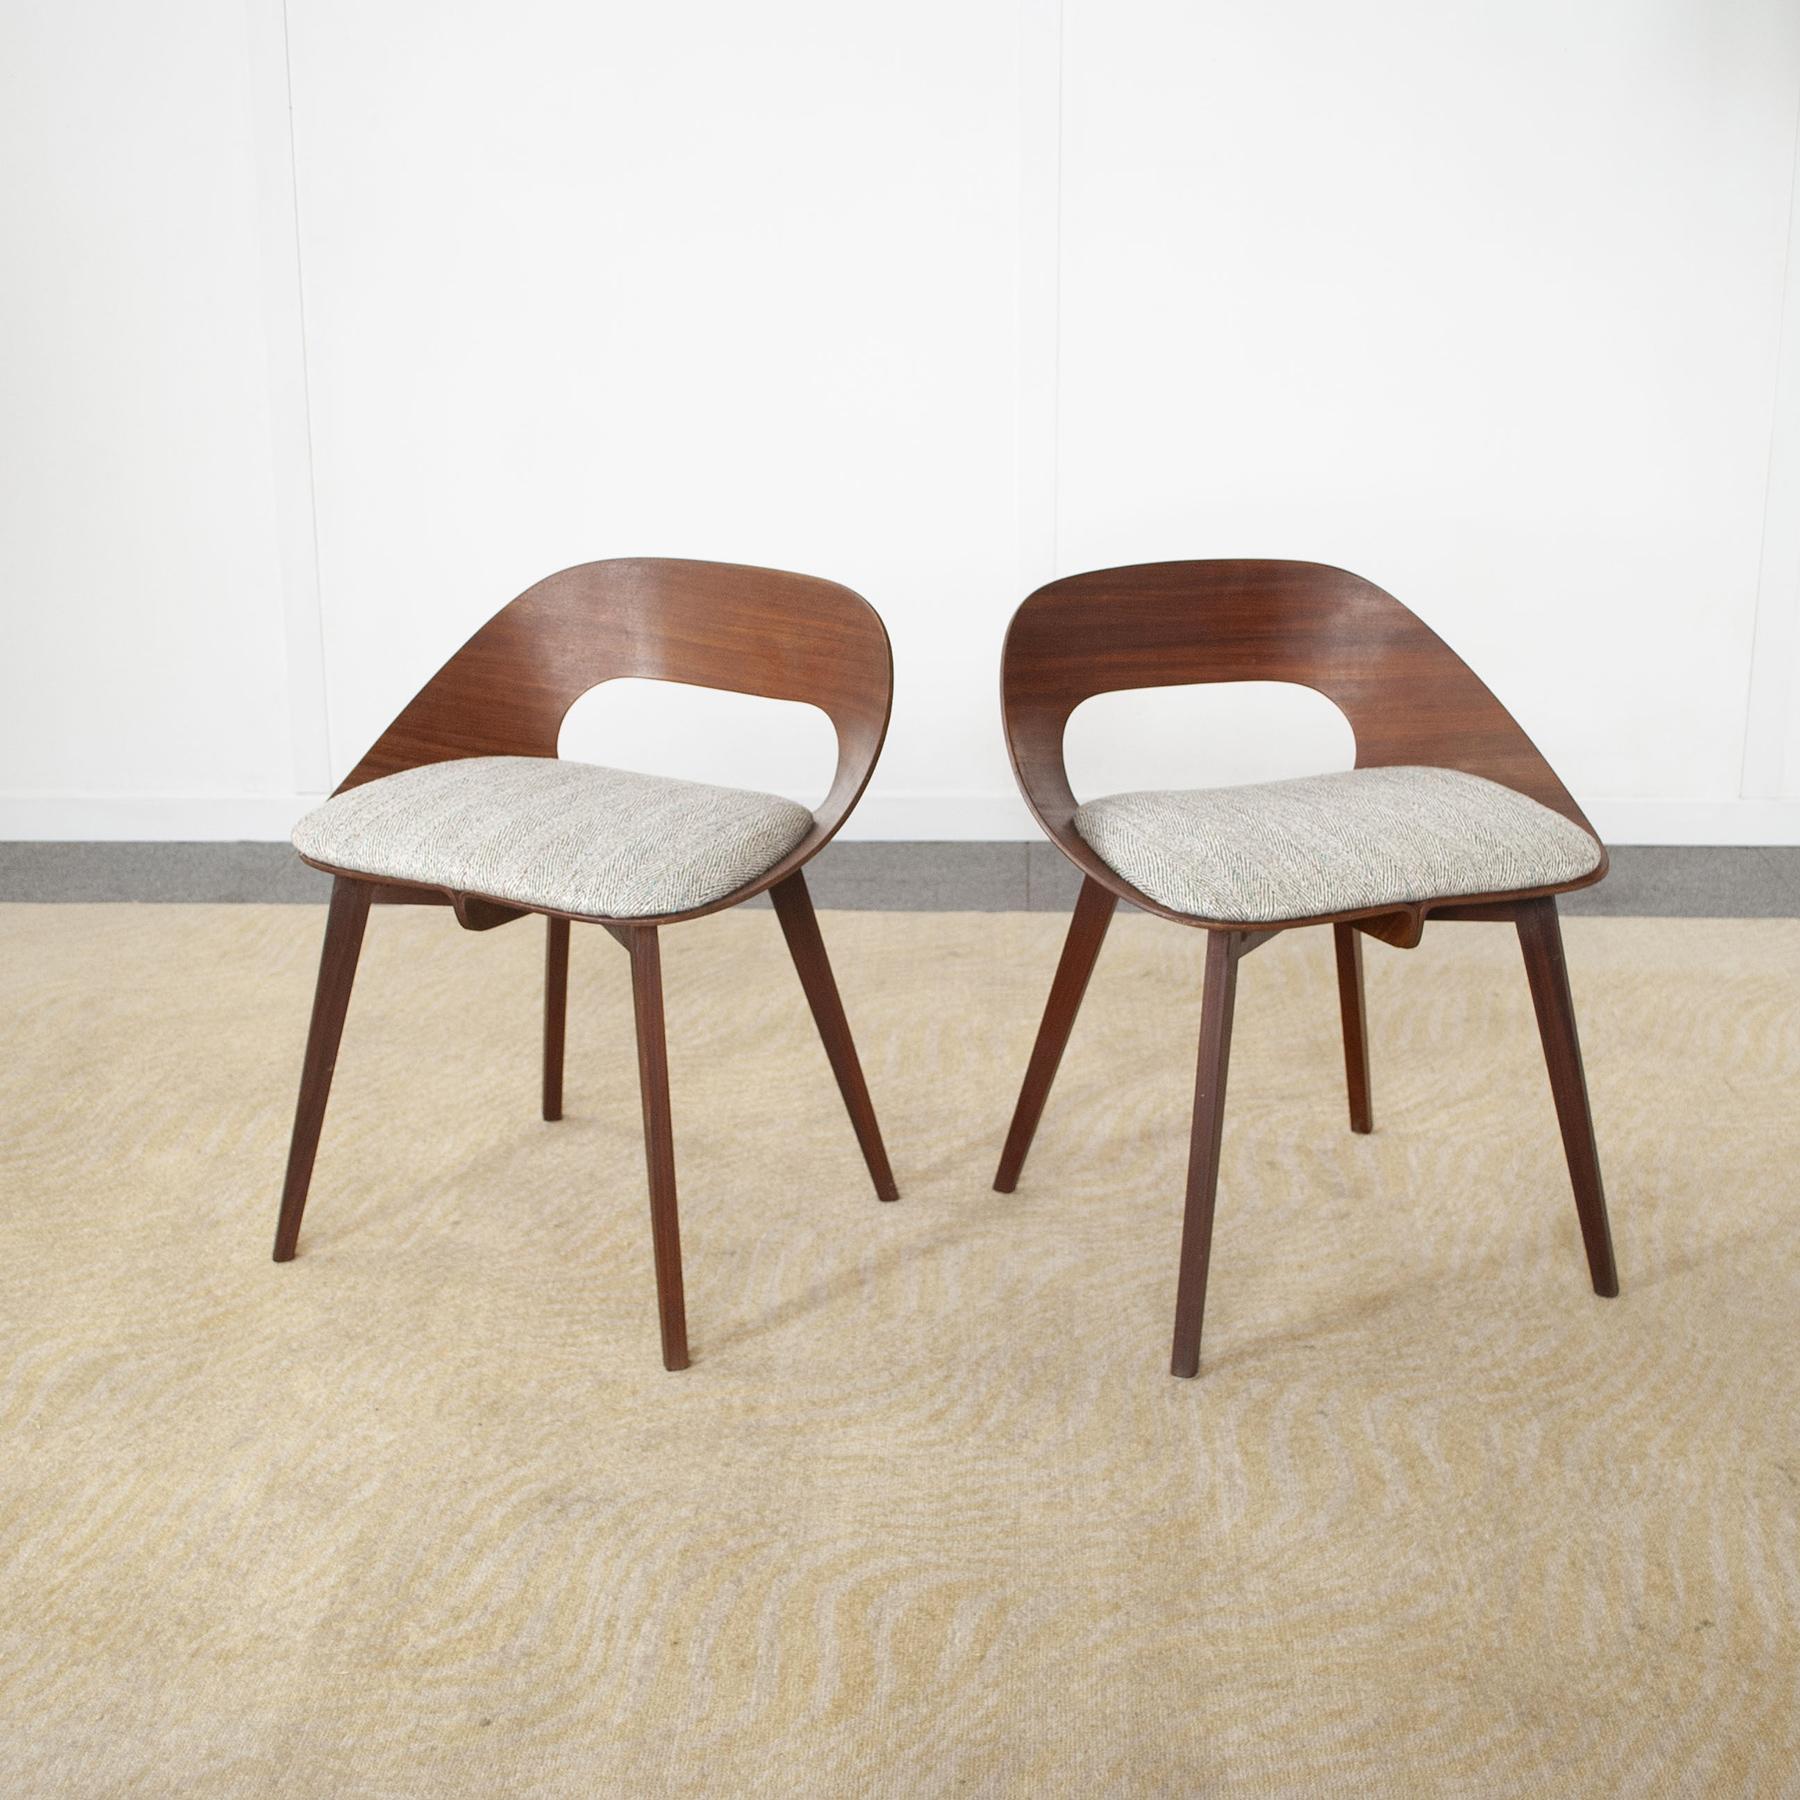 Set of two club chairs in the style of Antonin Suman production Creazioni Stilcasa Milano 1950s.